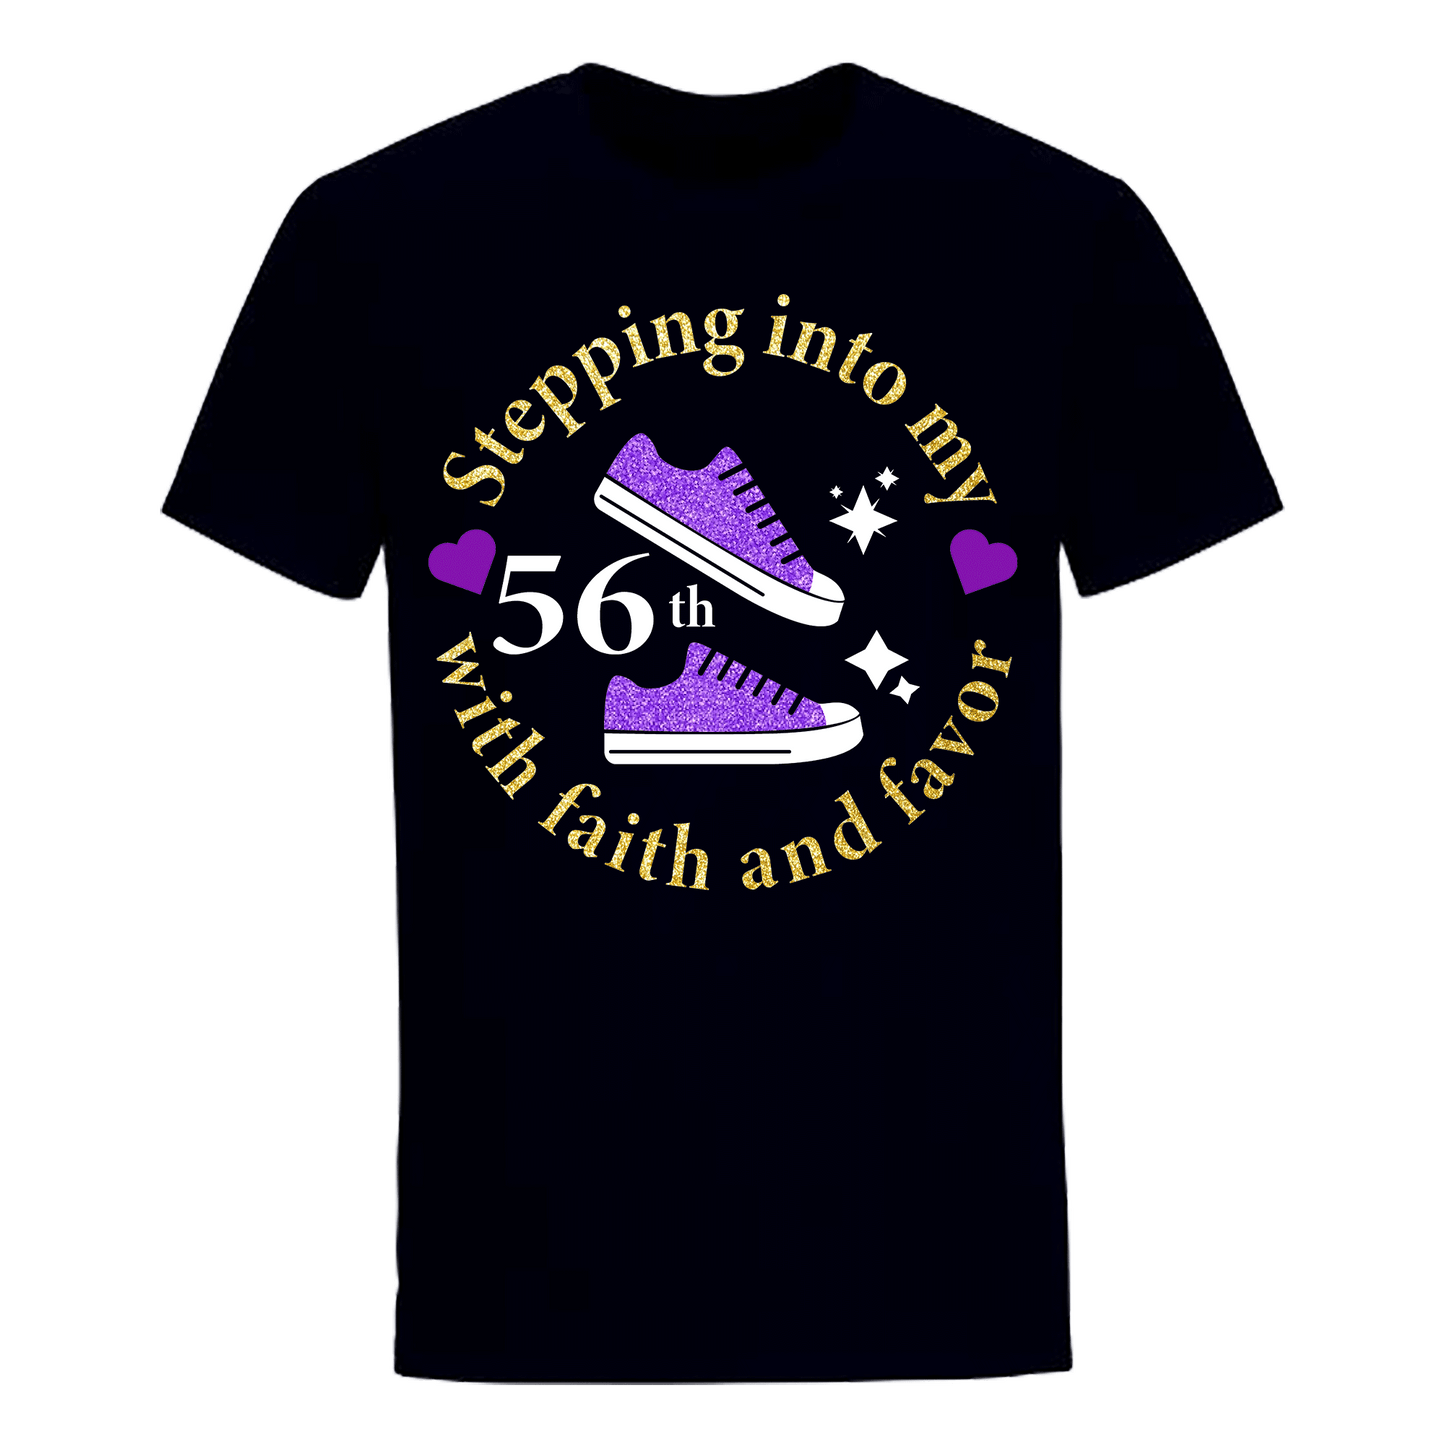 STEPPING INTO 56TH WITH FAITH & FAVOR UNISEX SHIRT